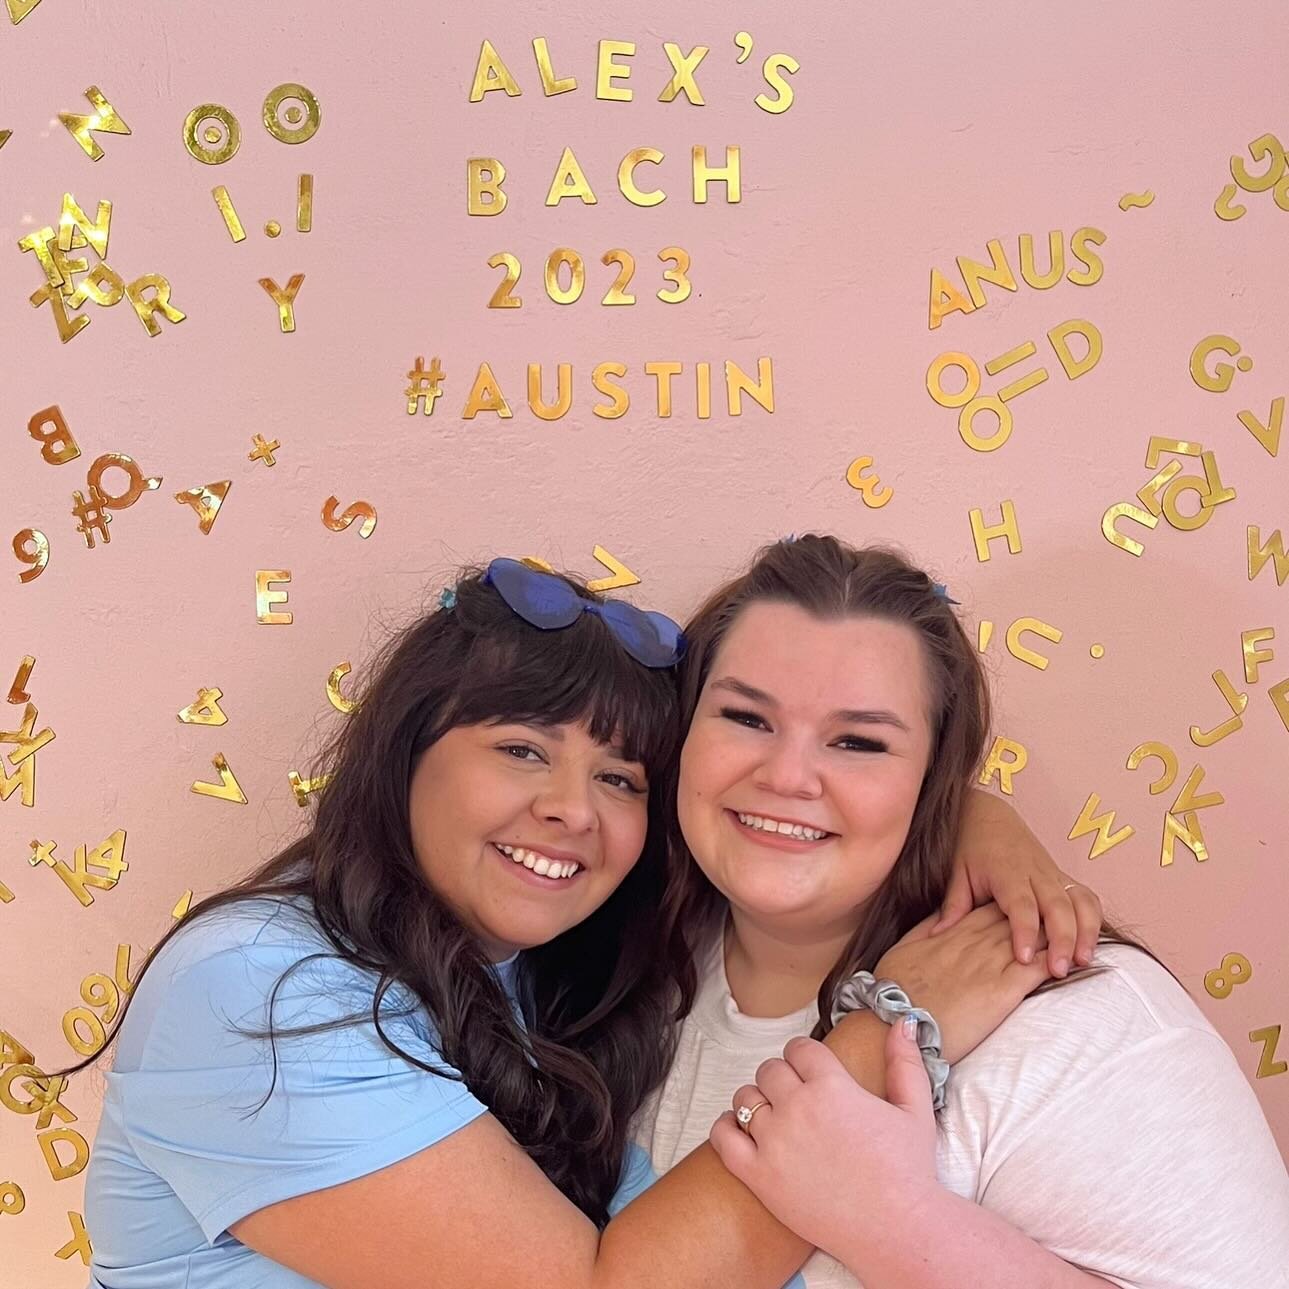 Congratulations Alex! Thank you for letting us be a part of your special weekend. 💕🫶 
.
.
.
.
##austin #austinbachelorette #bachelorettepartyaustin #texasbride #texasbachelorette #bride #girlythings